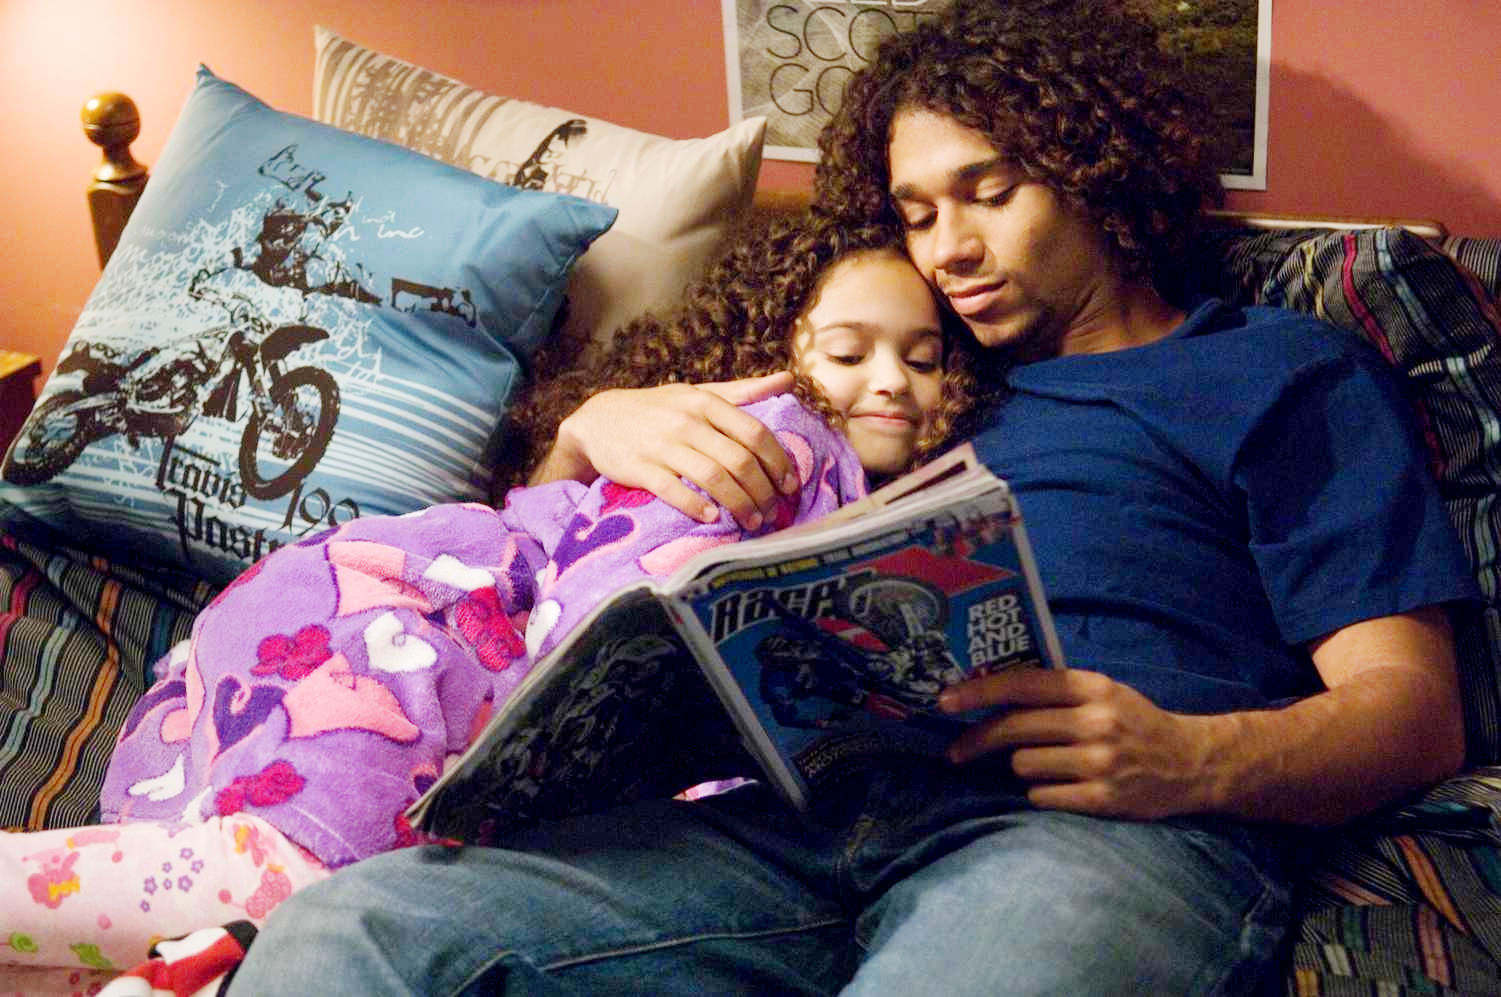 Madison Pettis stars as Bailey Bryant and Corbin Bleu stars as Cale Bryant in Samuel Goldwyn Films' Free Style (2009). Photo credit by Marcel Williams.